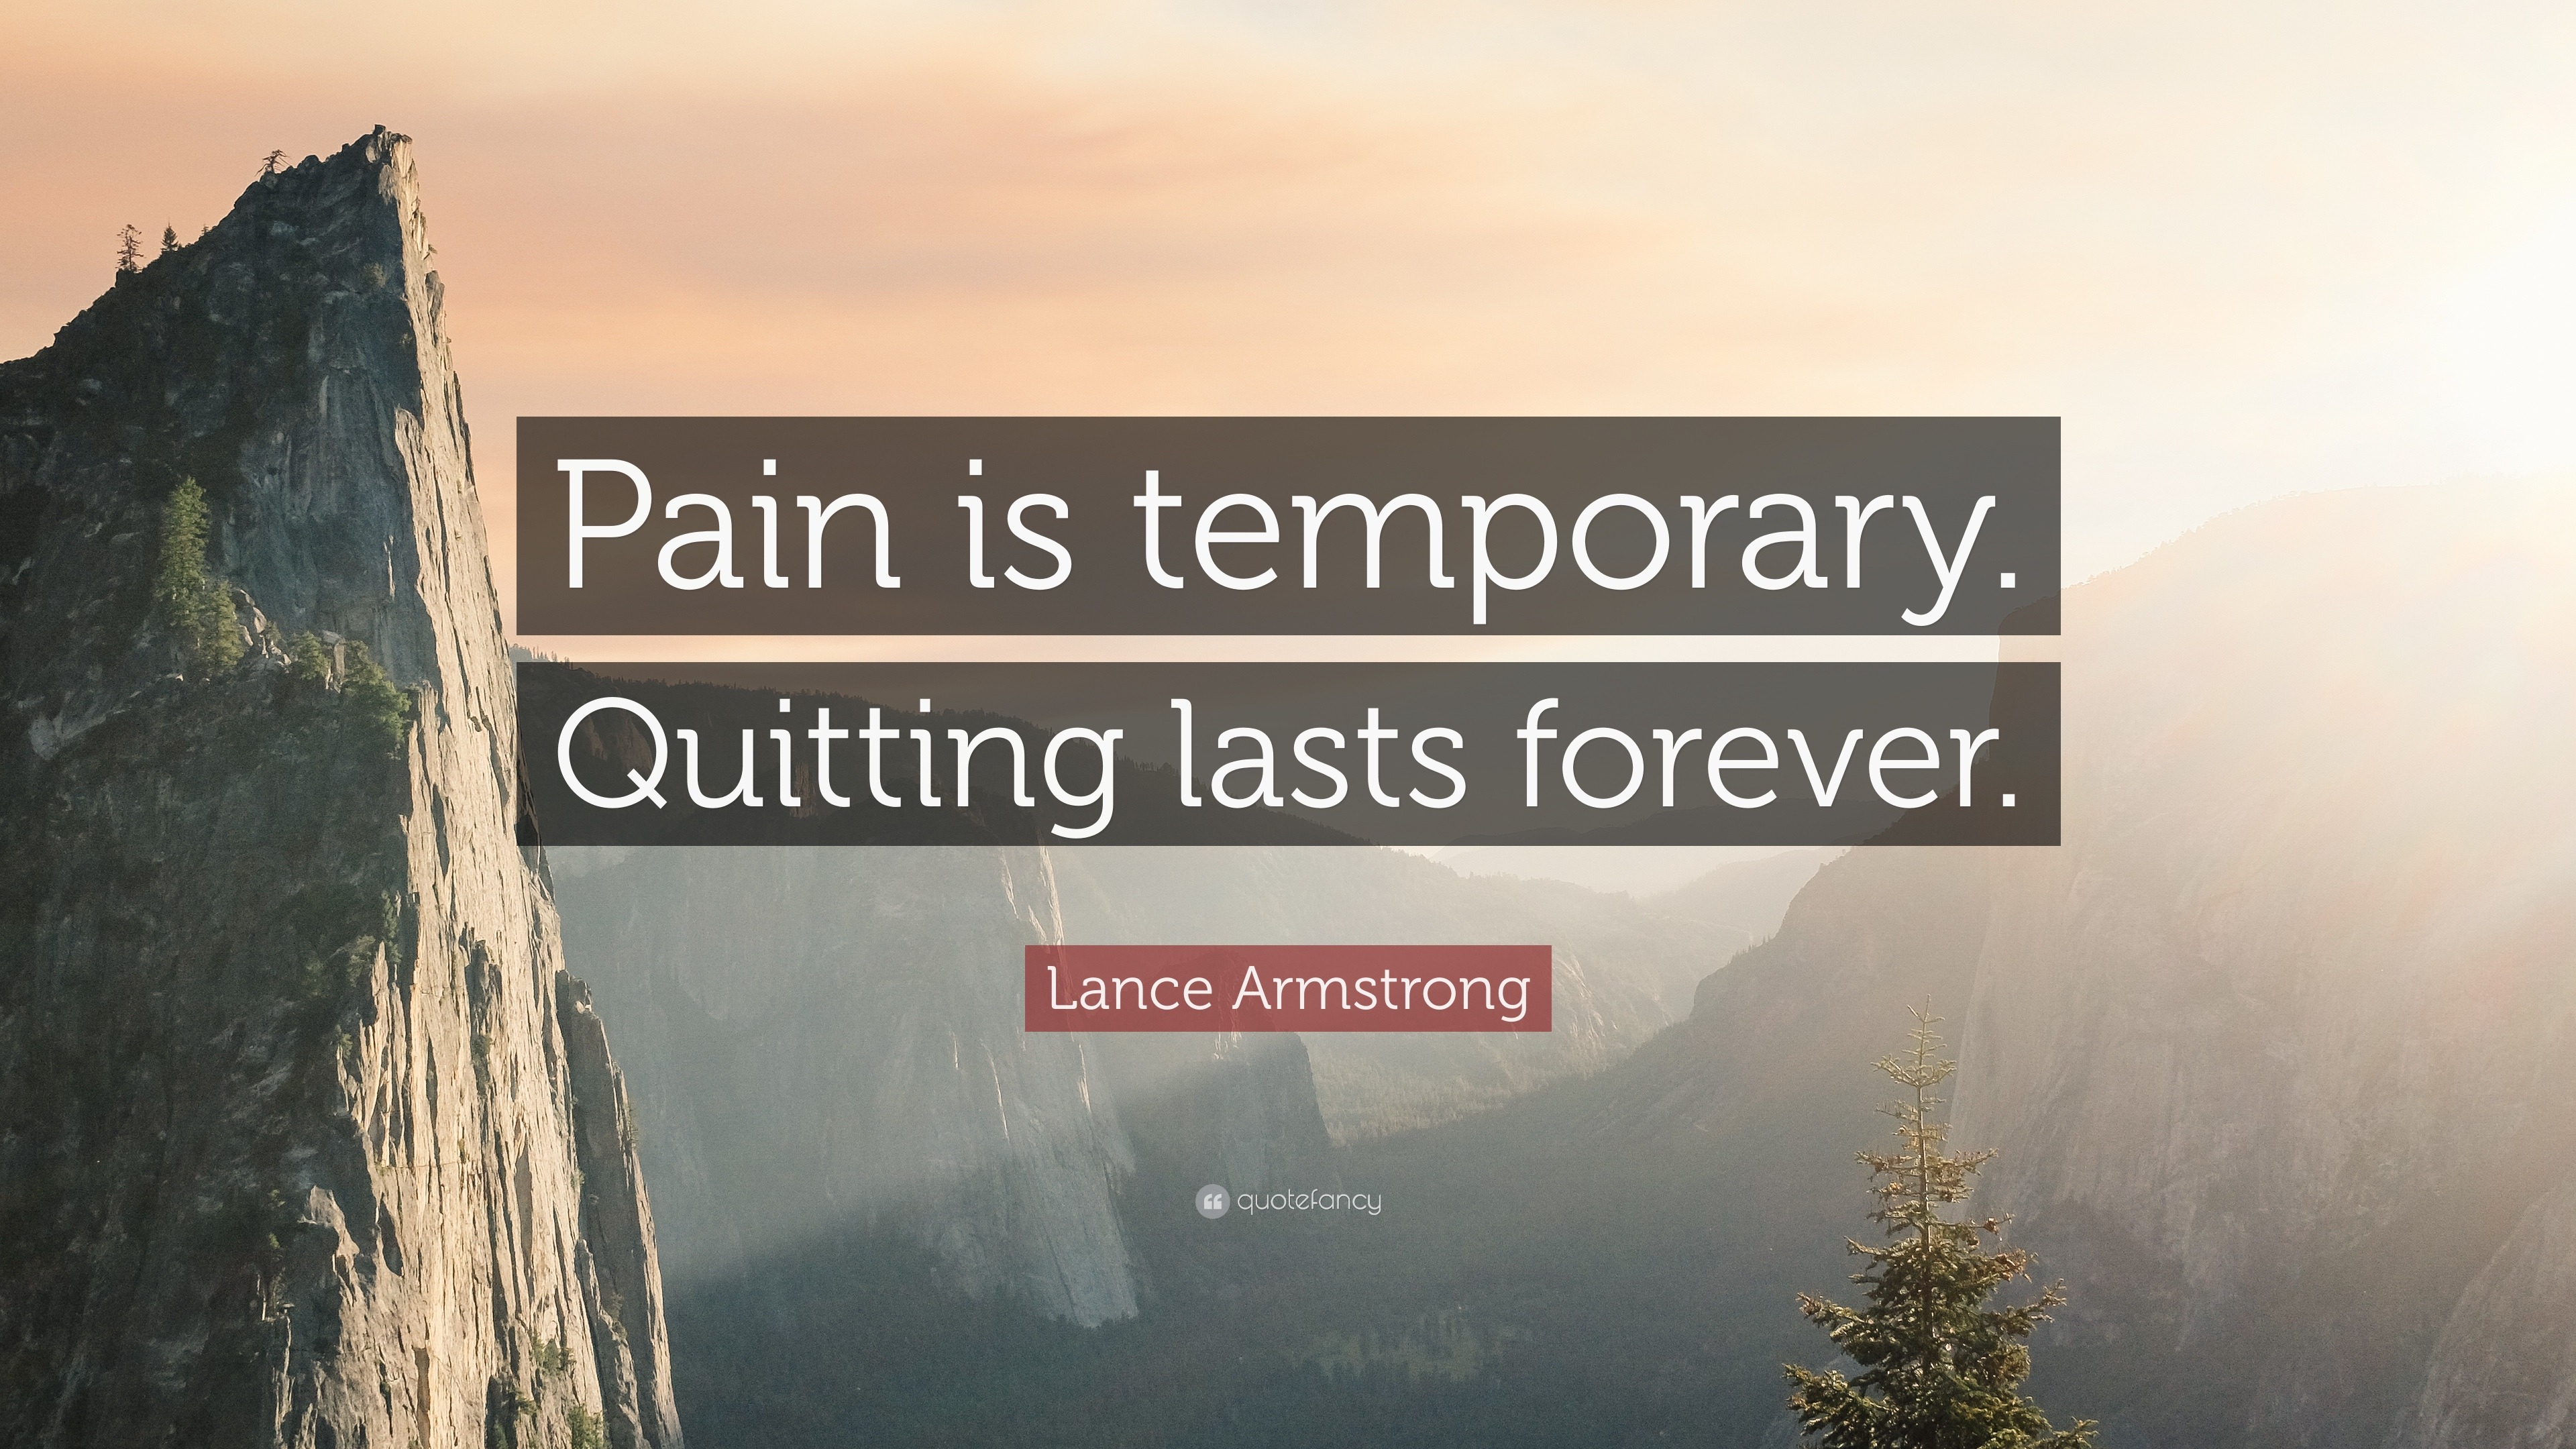 Lance Armstrong Quote: "Pain is temporary. Quitting lasts ...